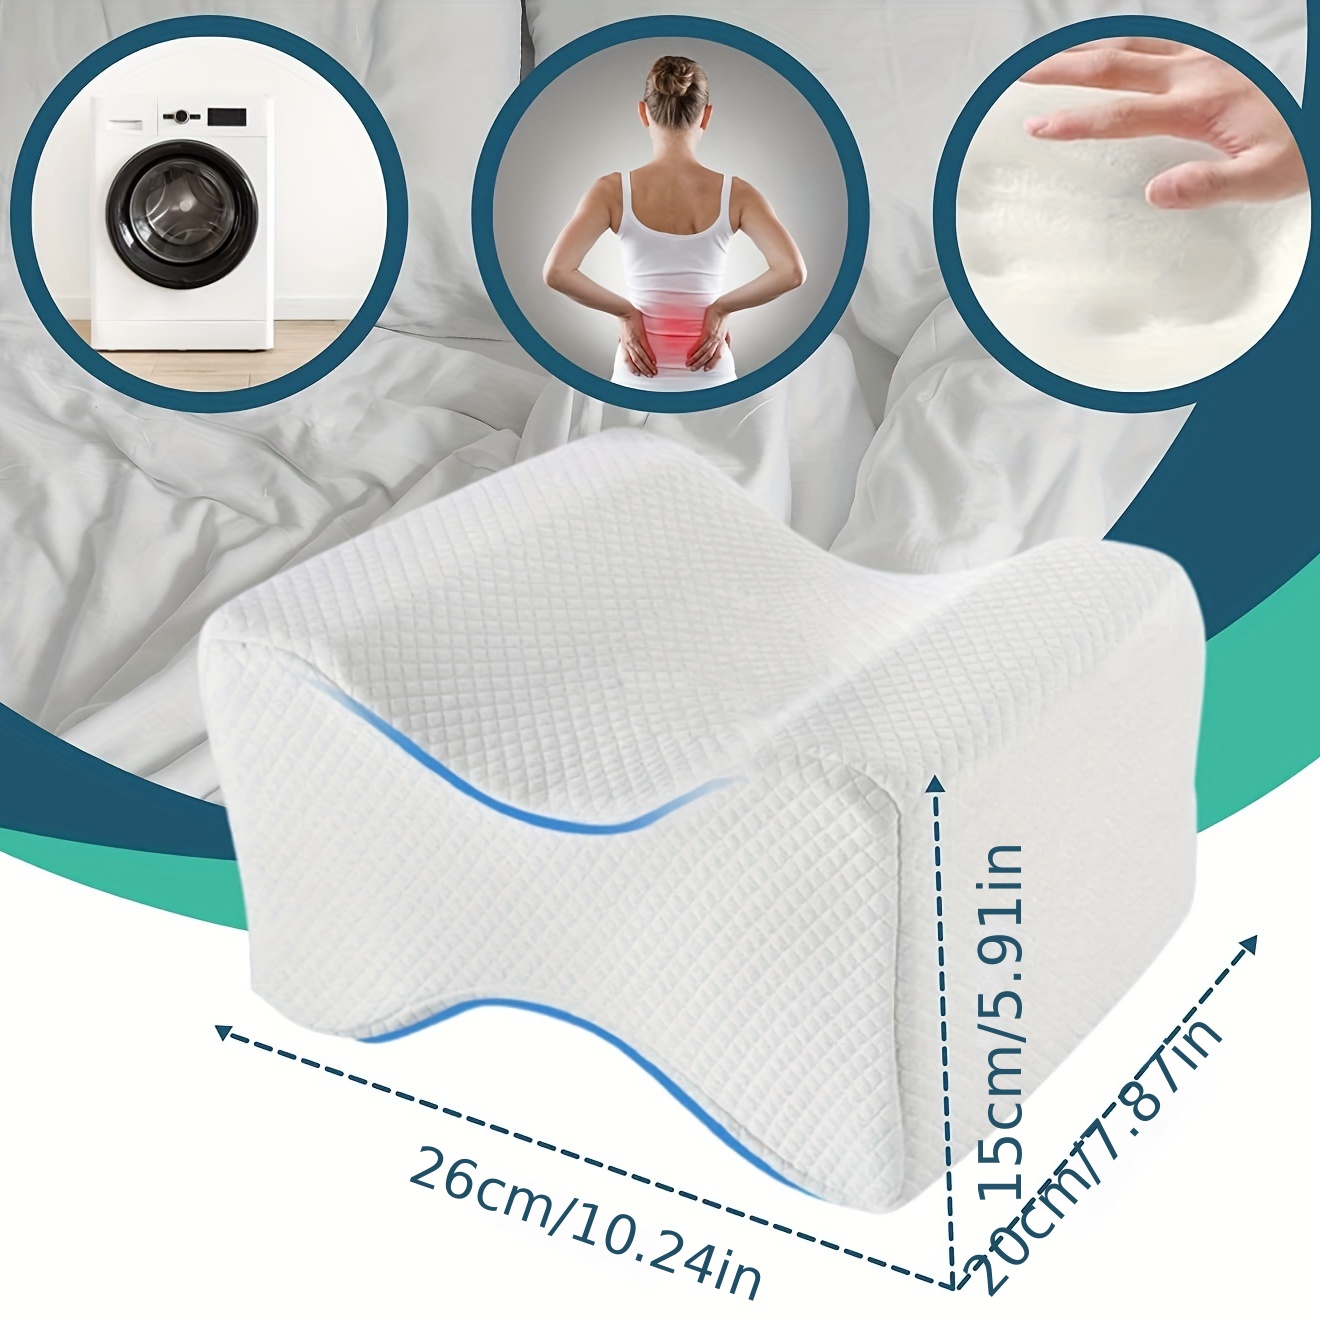  Knee Pillow for Side Sleepers - 100% Memory Foam Wedge Contour  - Leg Pillows for Sleeping - Spacer Cushion for Spine Alignment, Back Pain,  Pregnancy Support (White) : Home & Kitchen